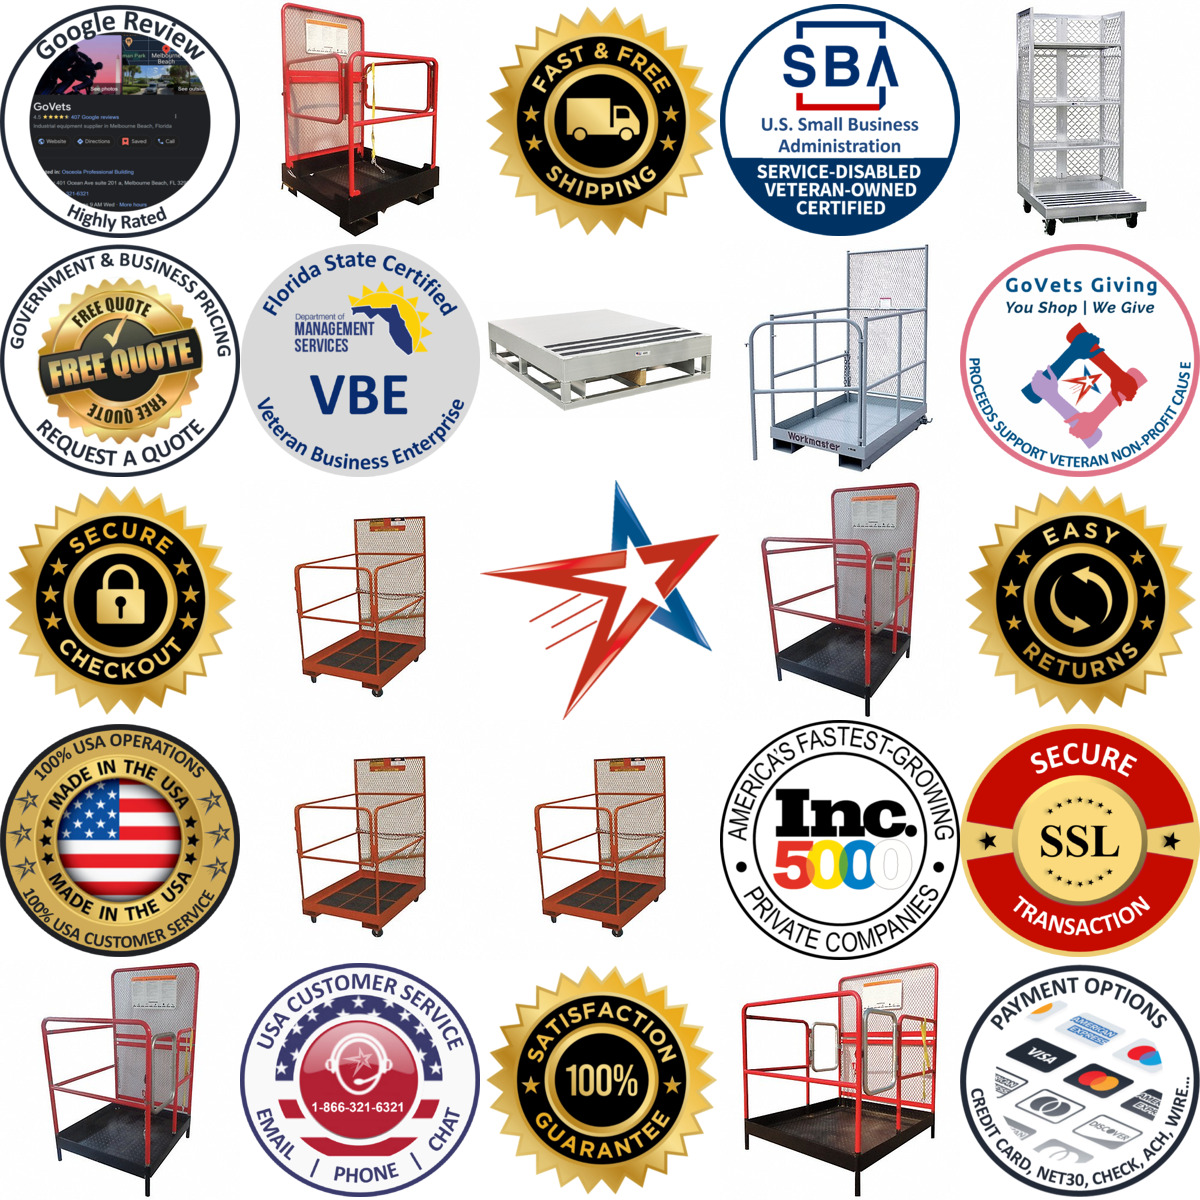 A selection of Forklift Work Platforms products on GoVets